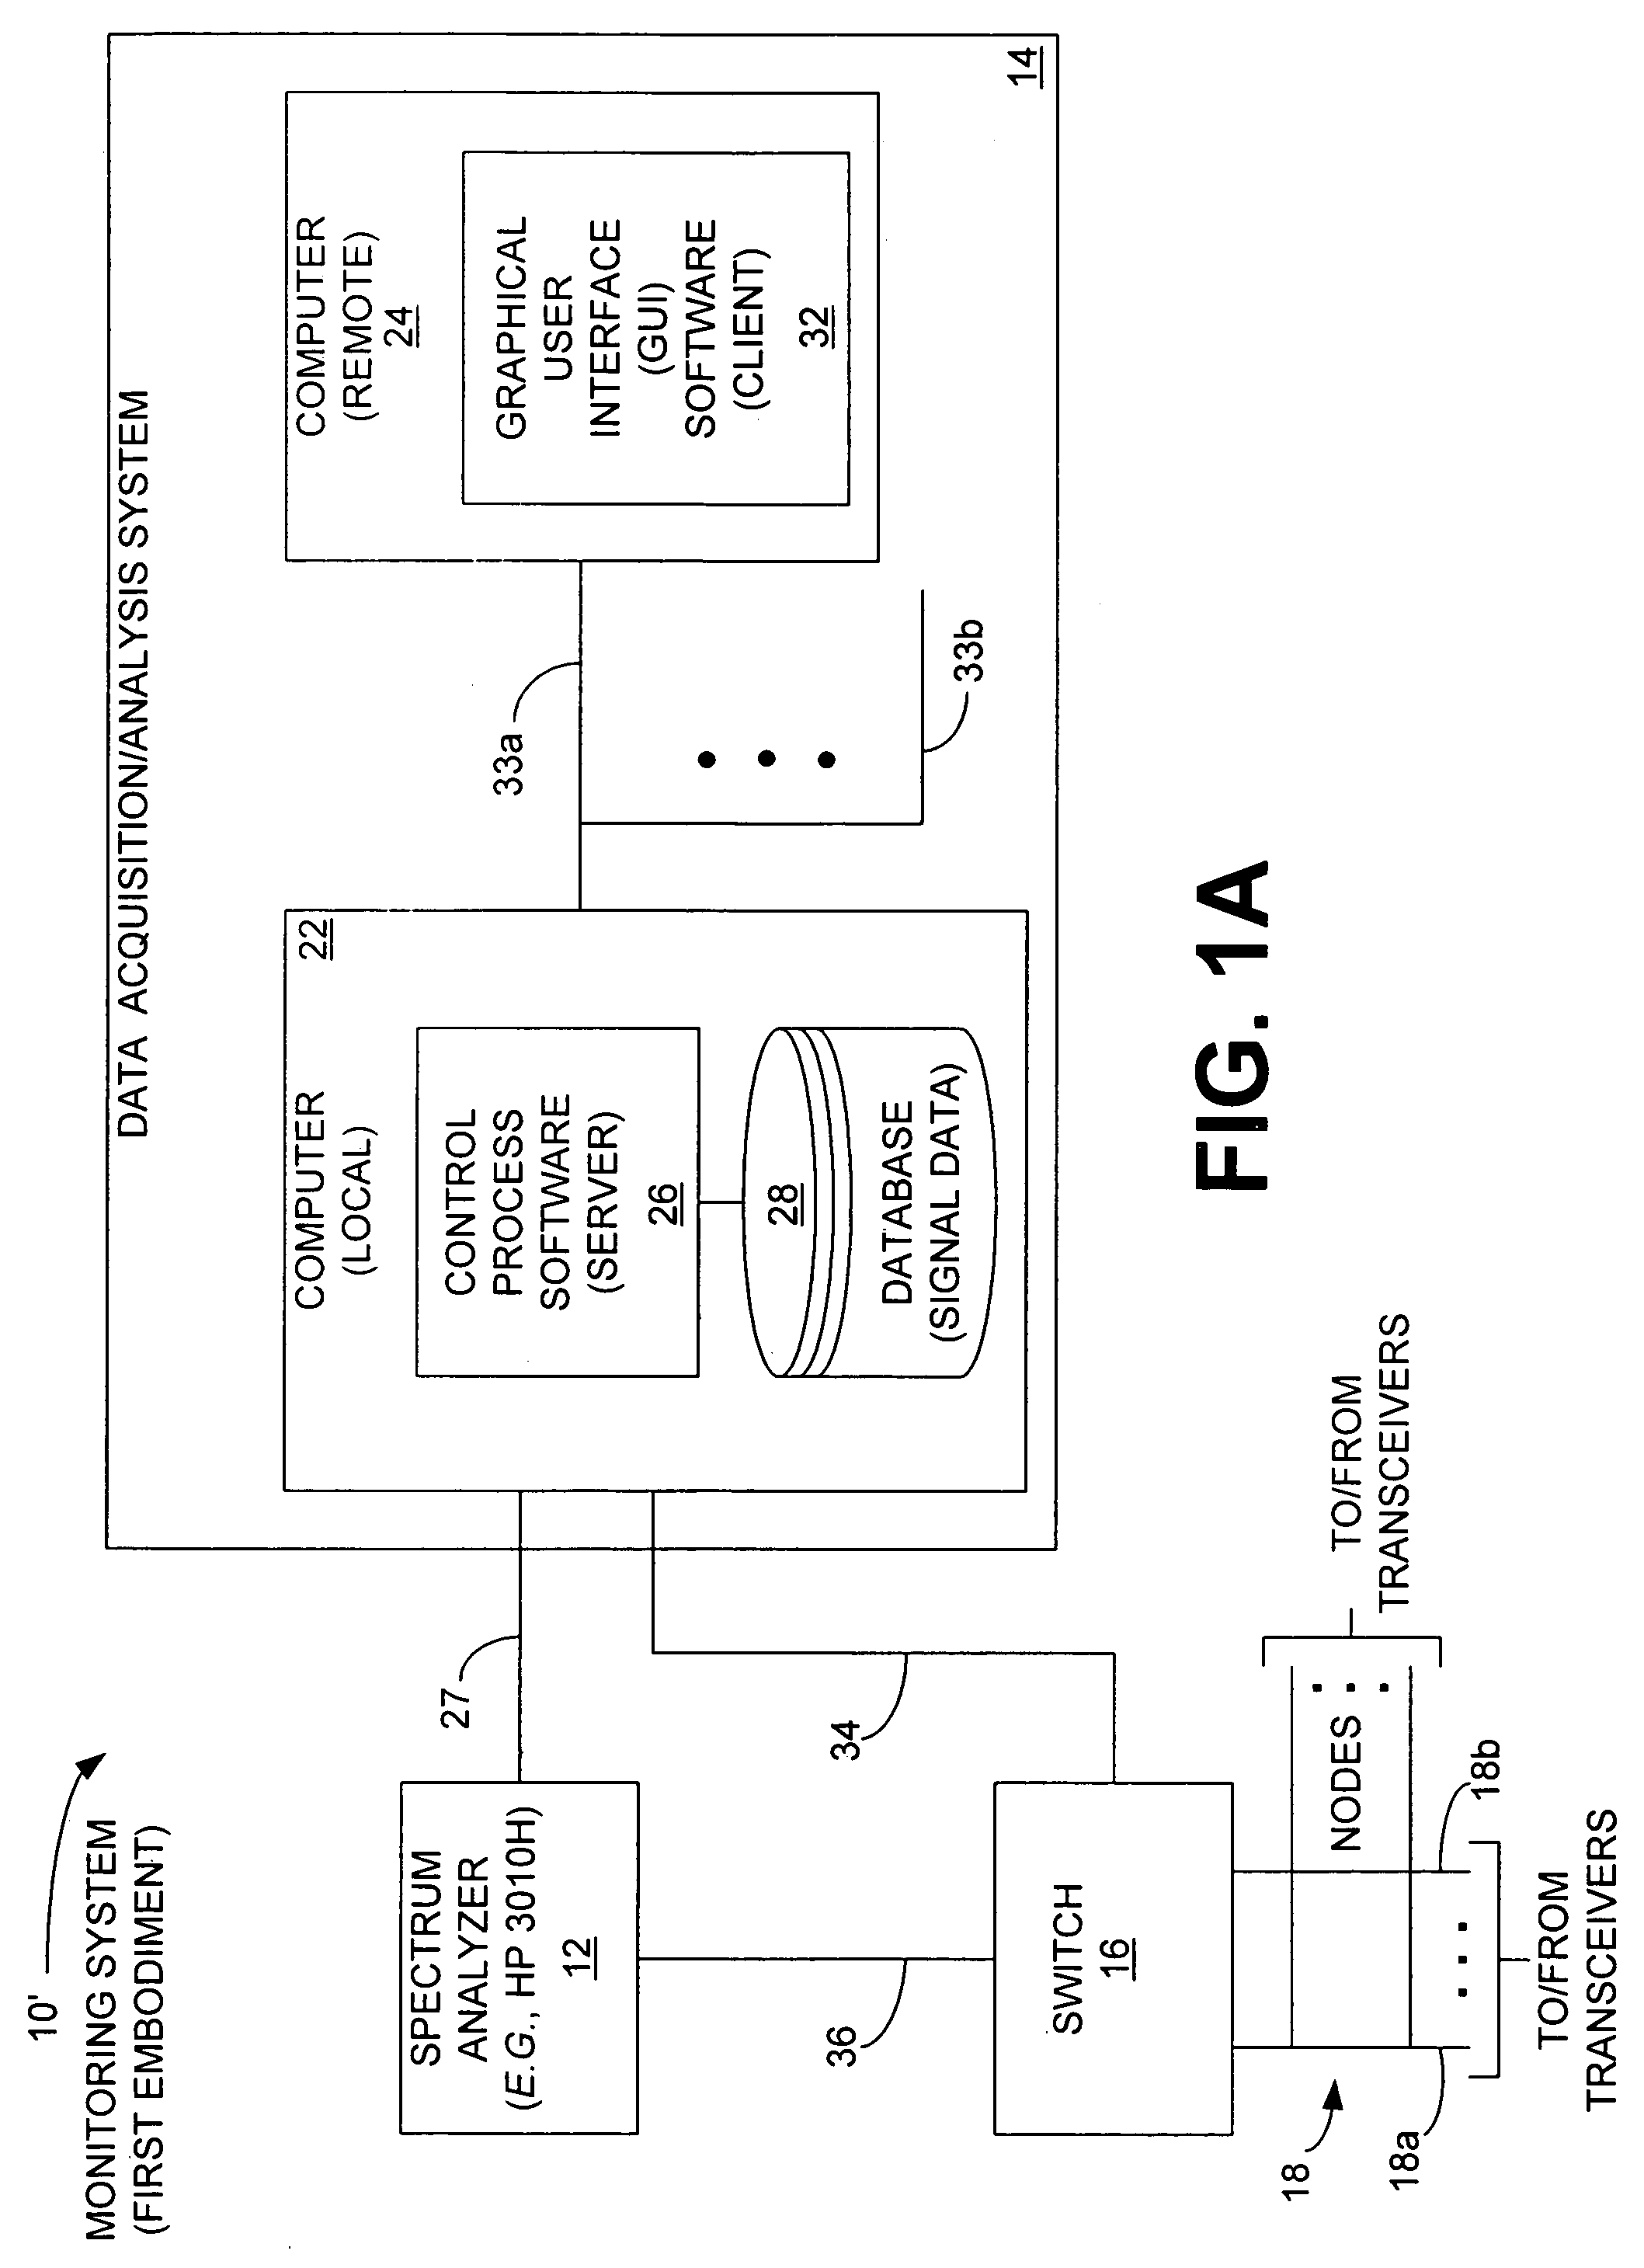 Monitoring system and method implementing warning interface logic